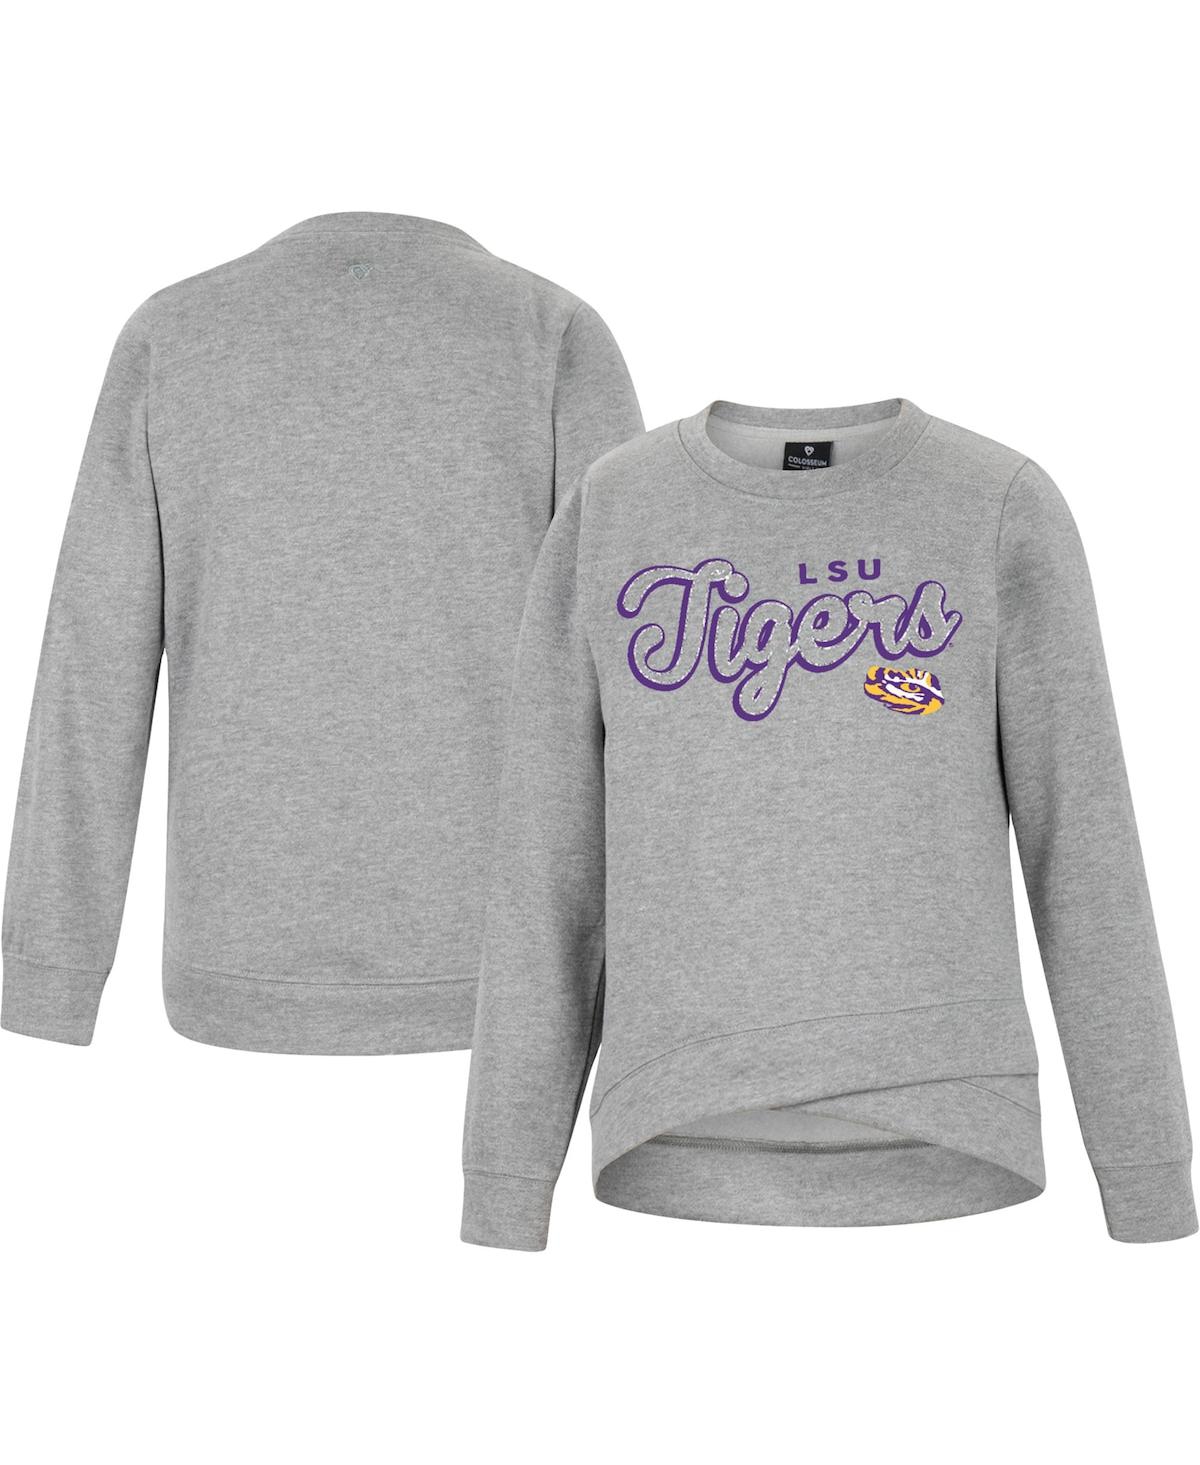 COLOSSEUM BIG GIRLS COLOSSEUM HEATHER GRAY LSU TIGERS WHOHOOPERS BLING CROSSOVER PULLOVER SWEATSHIRT